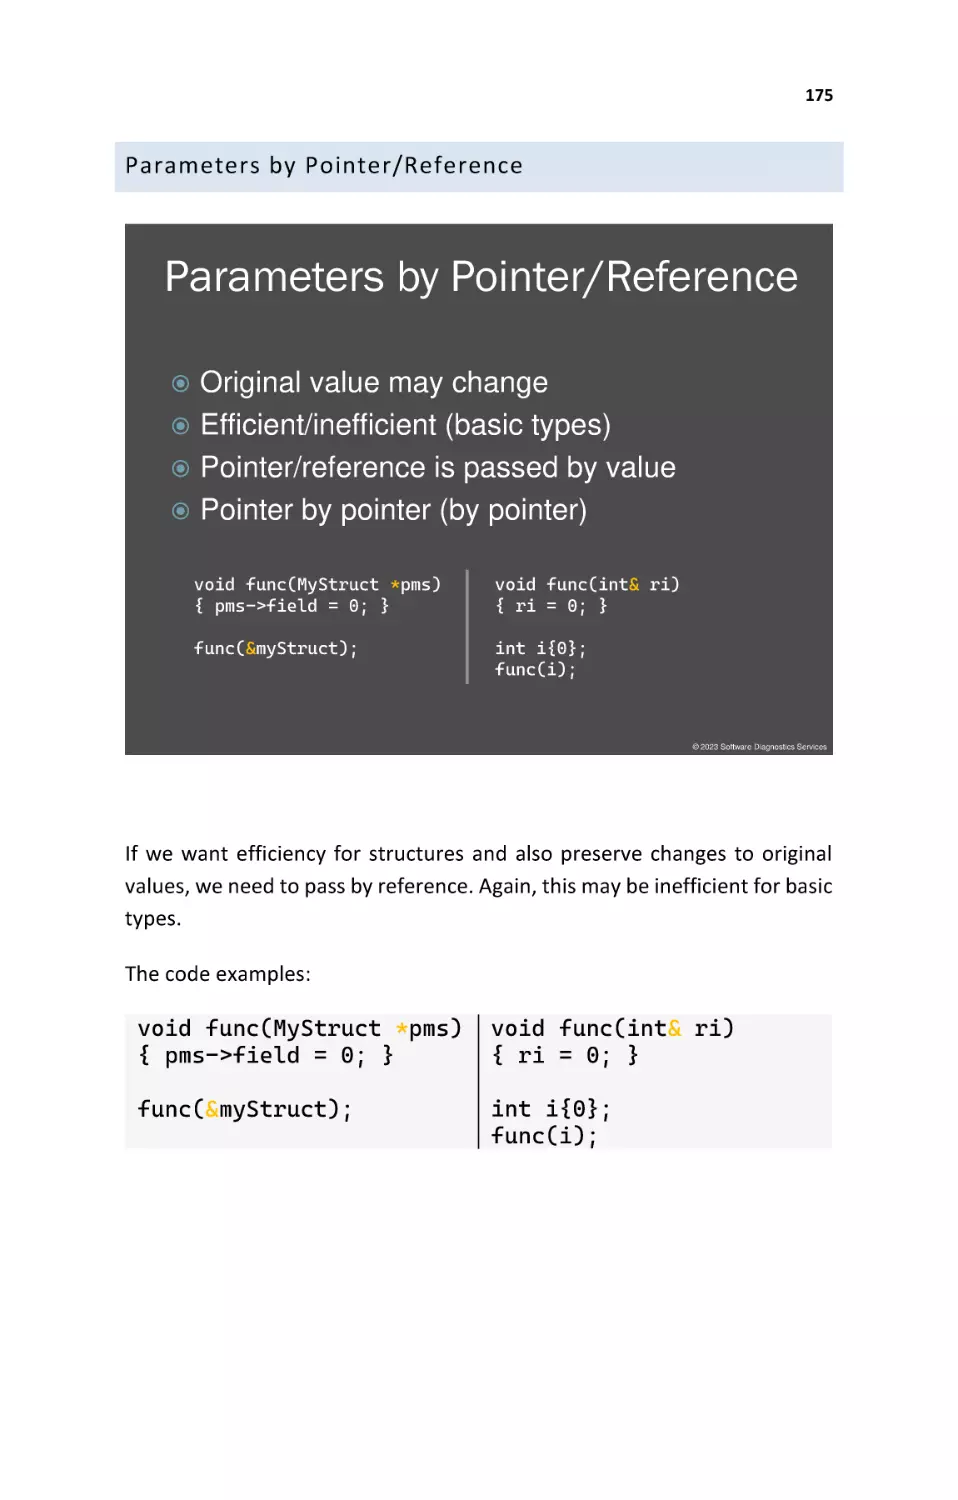 Parameters by Pointer/Reference